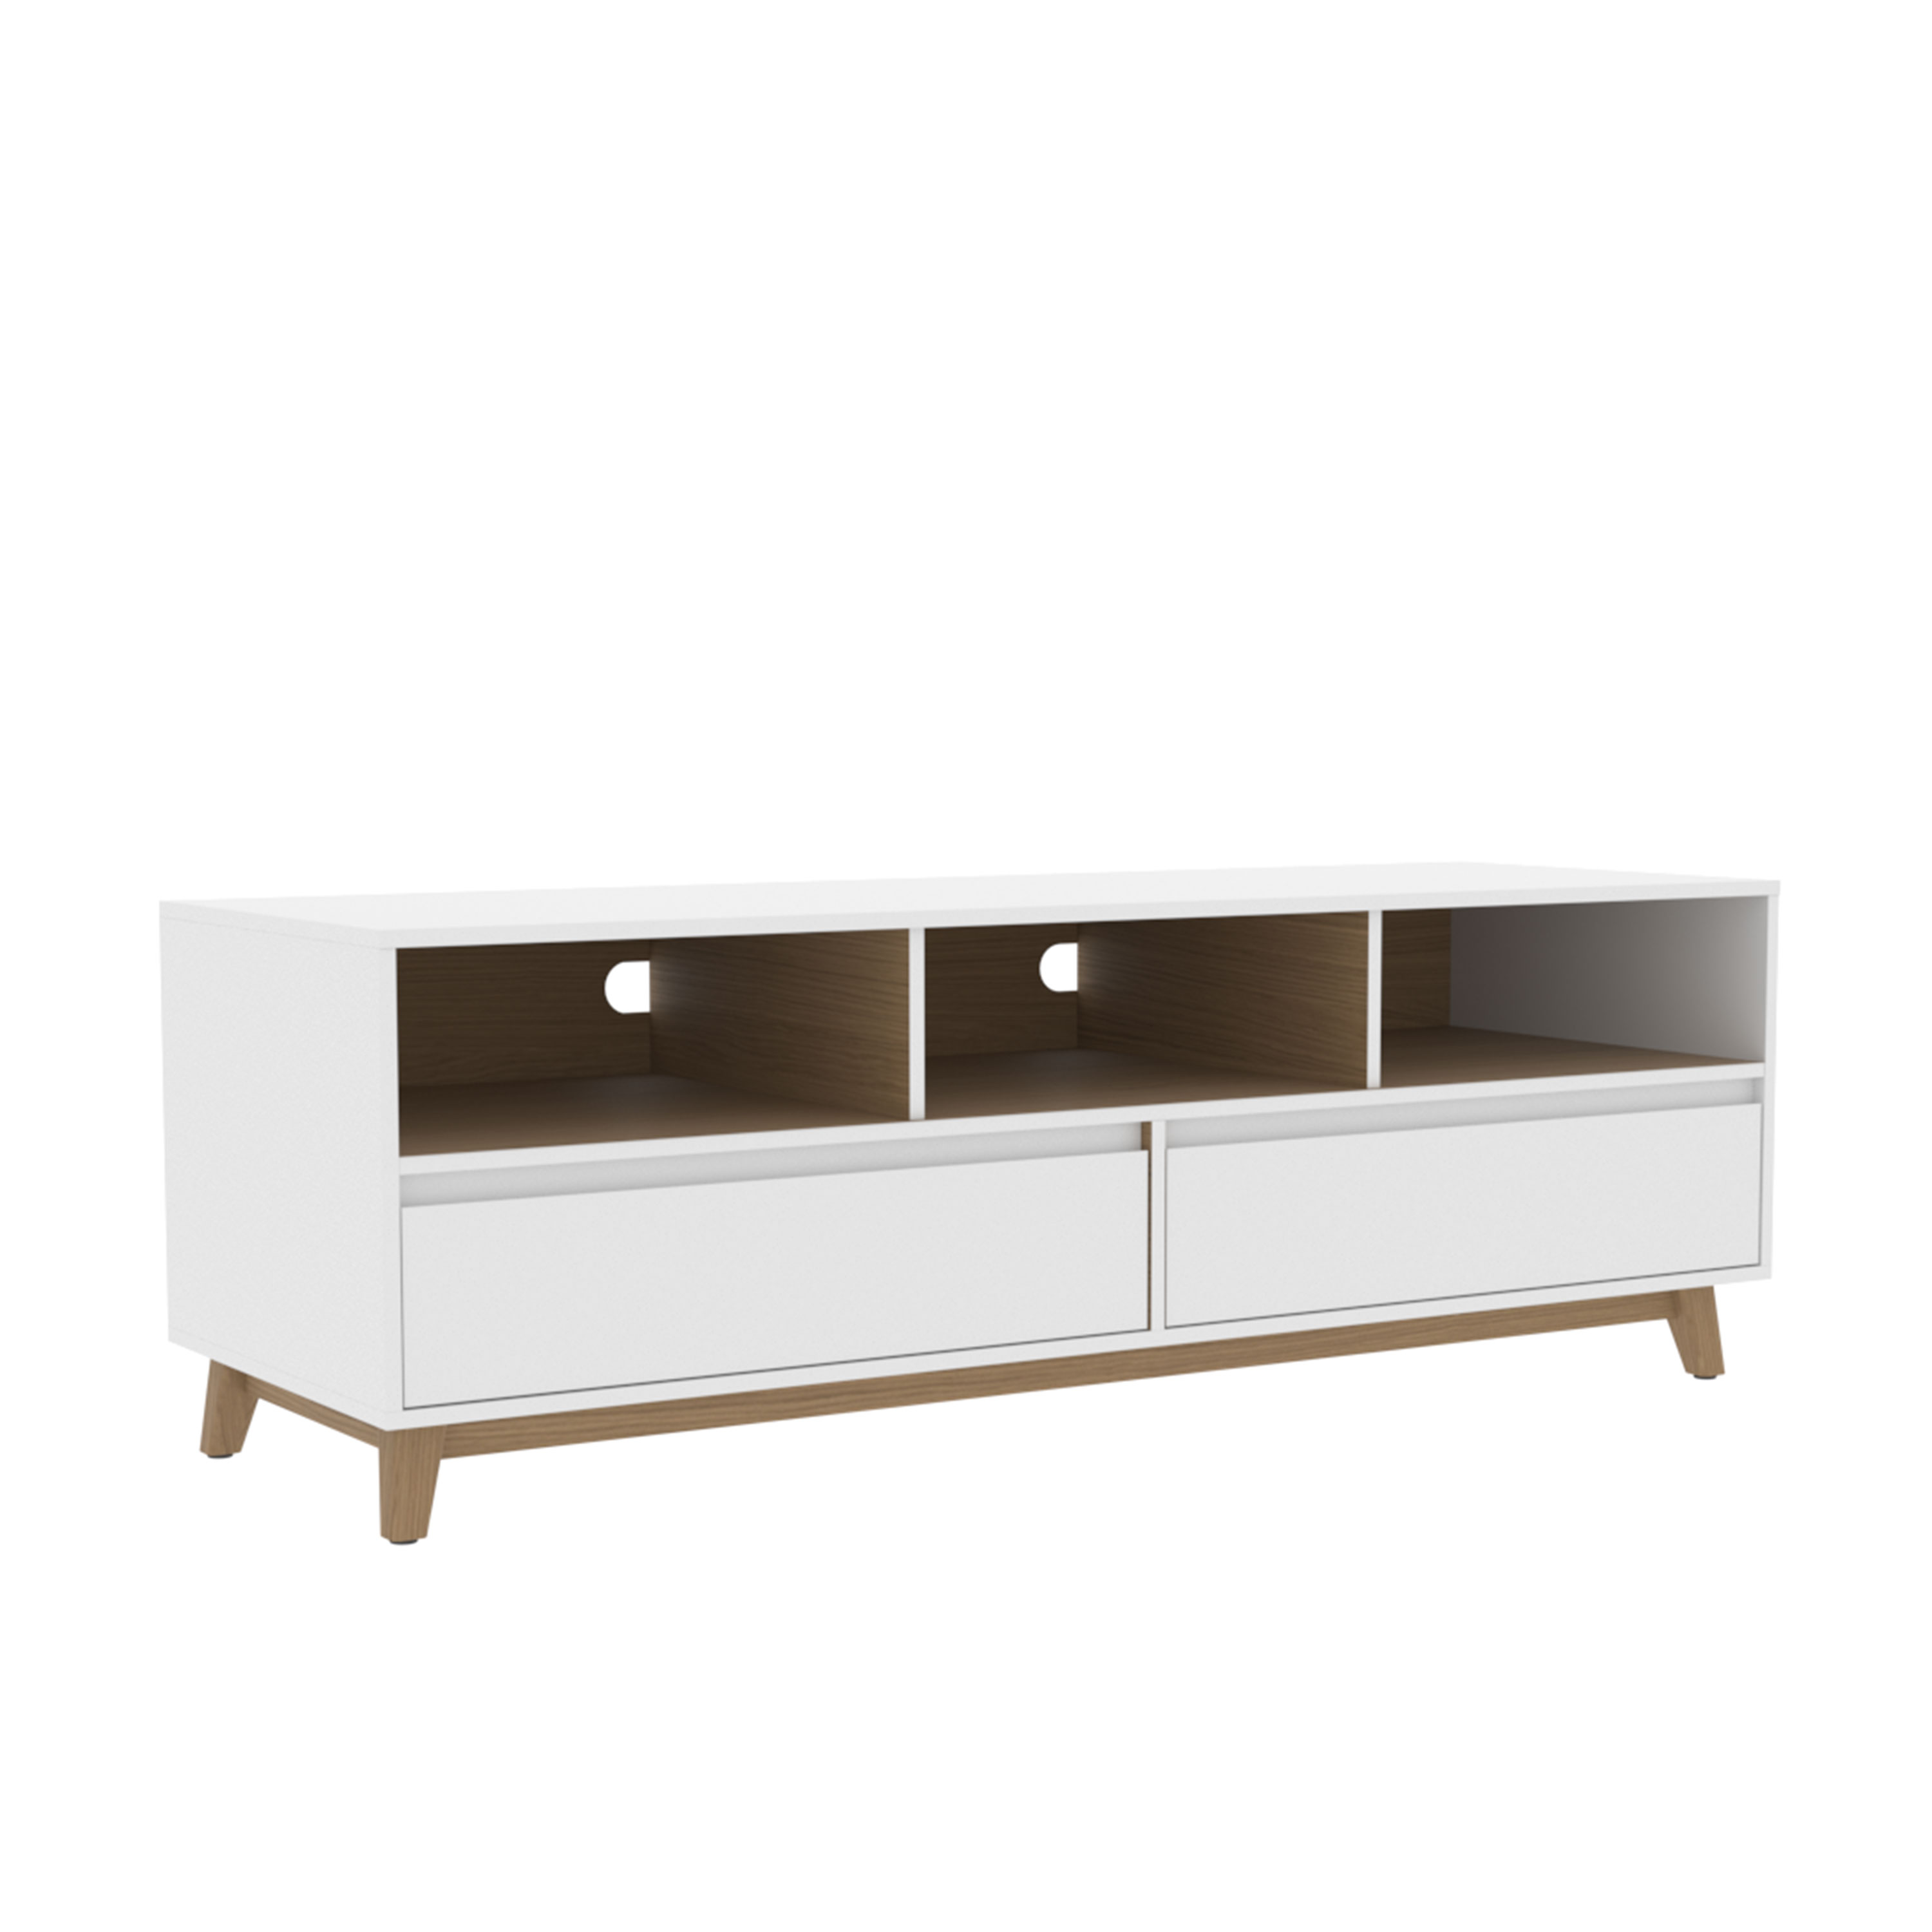 Mainstays Mid-Century TV Stand for TVs up to 70", White Finish - image 6 of 8